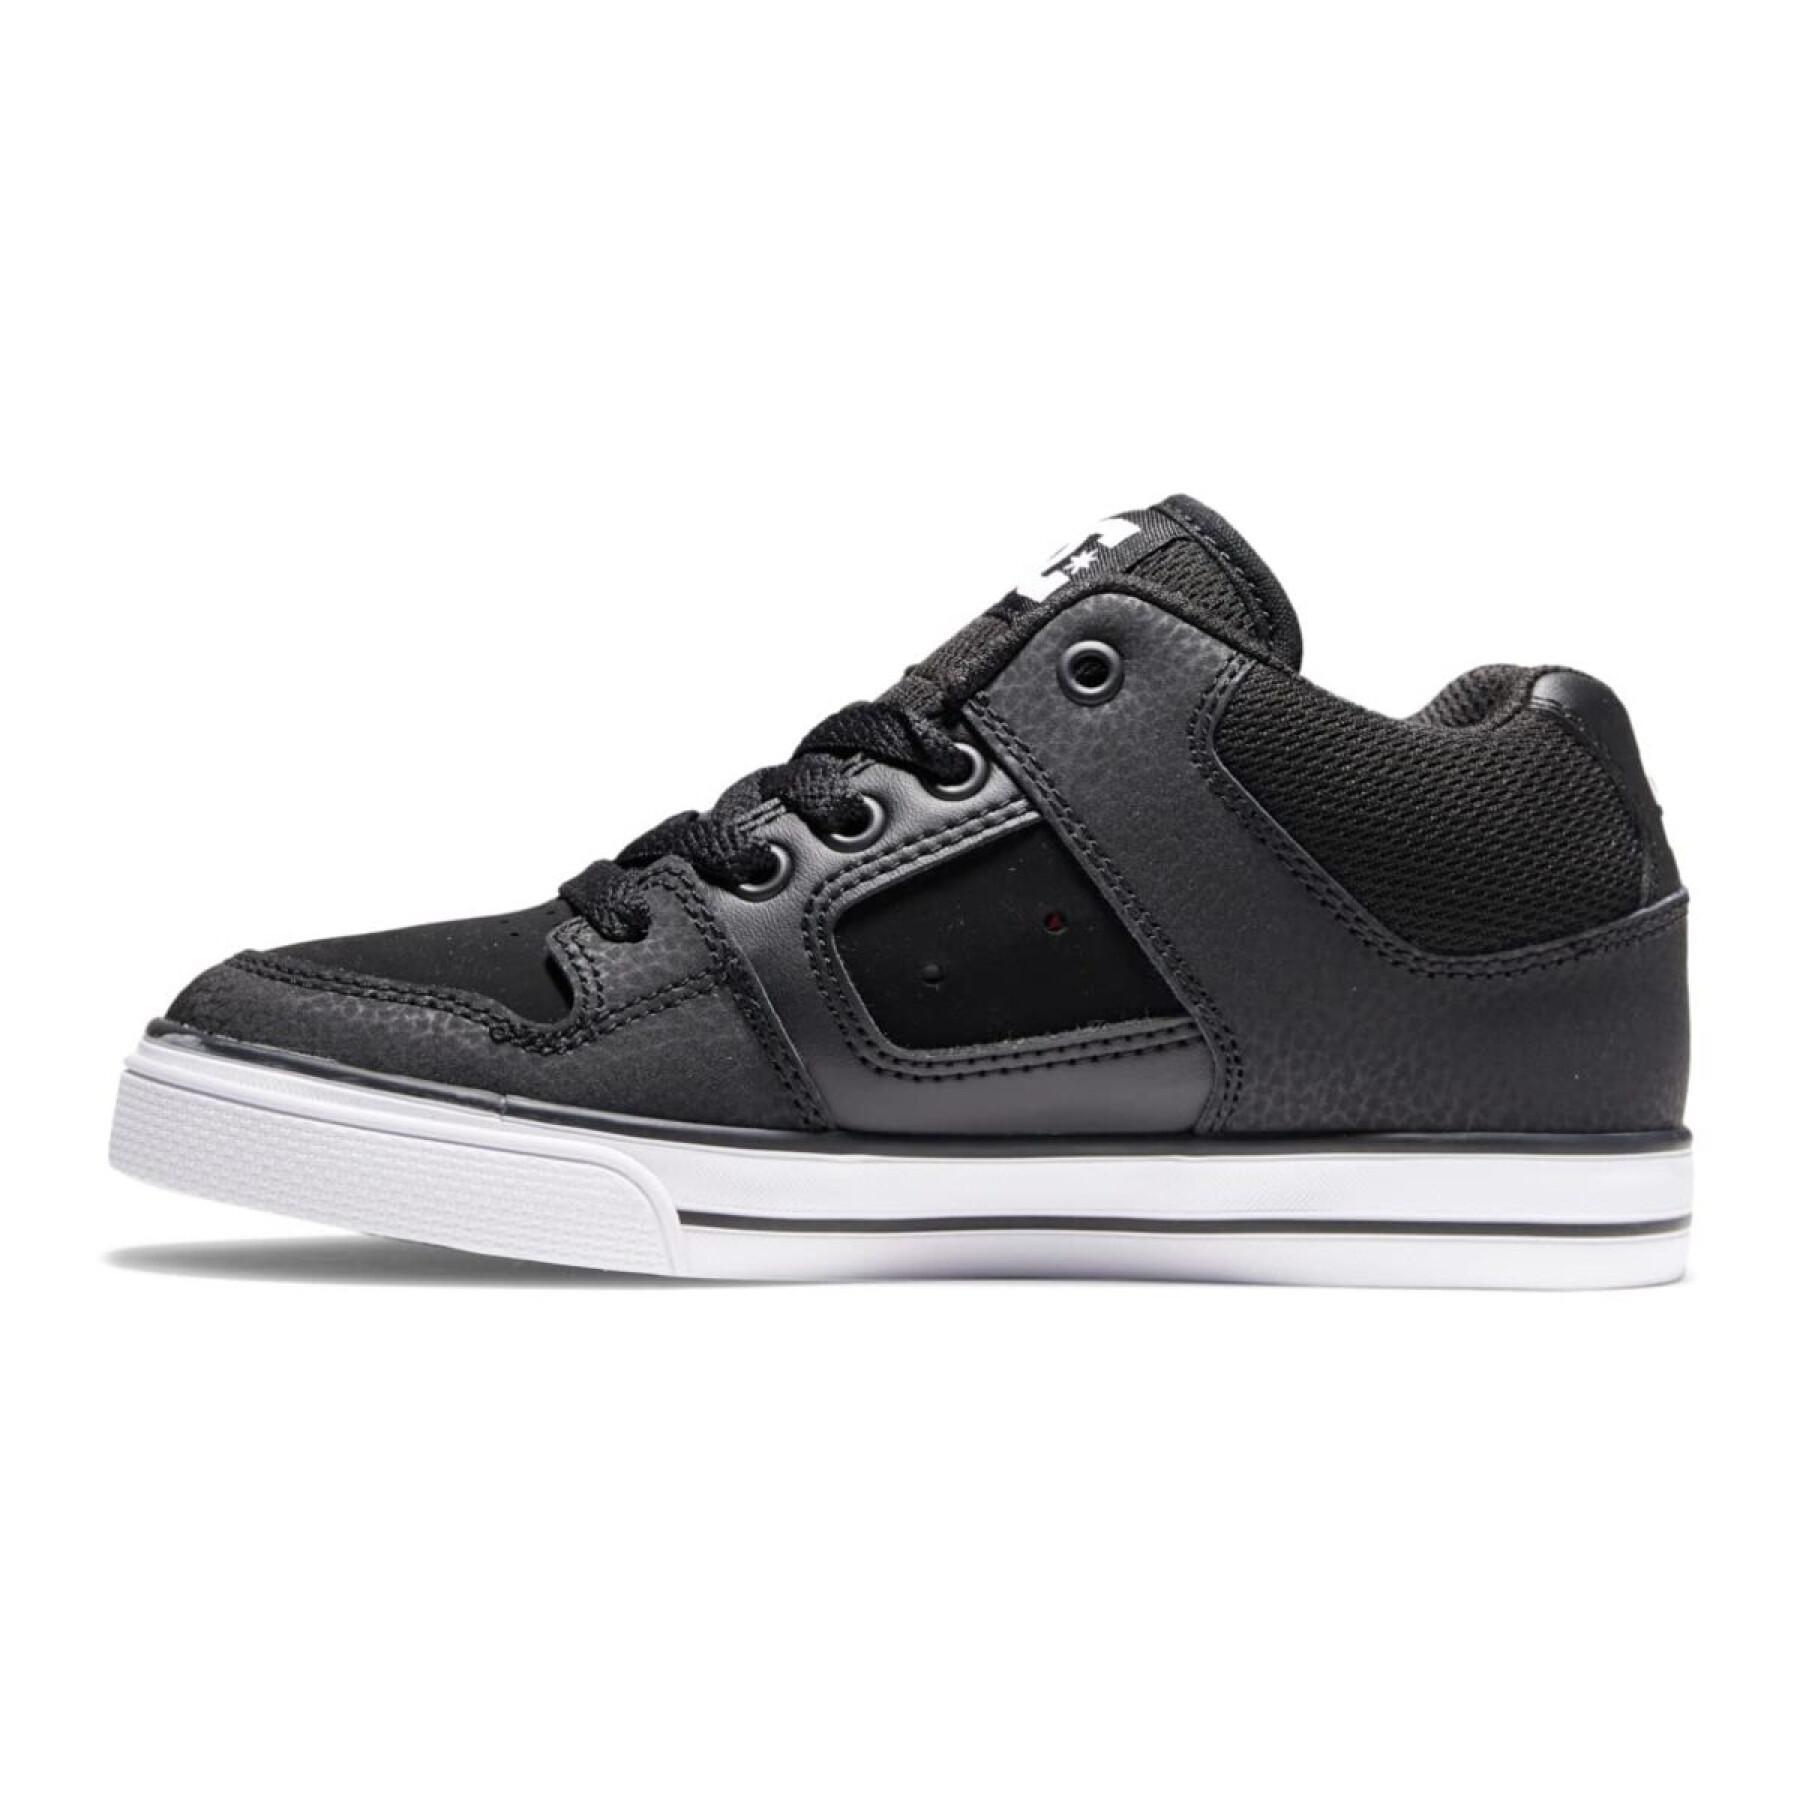 Children's sneakers DC Shoes Pure Mid